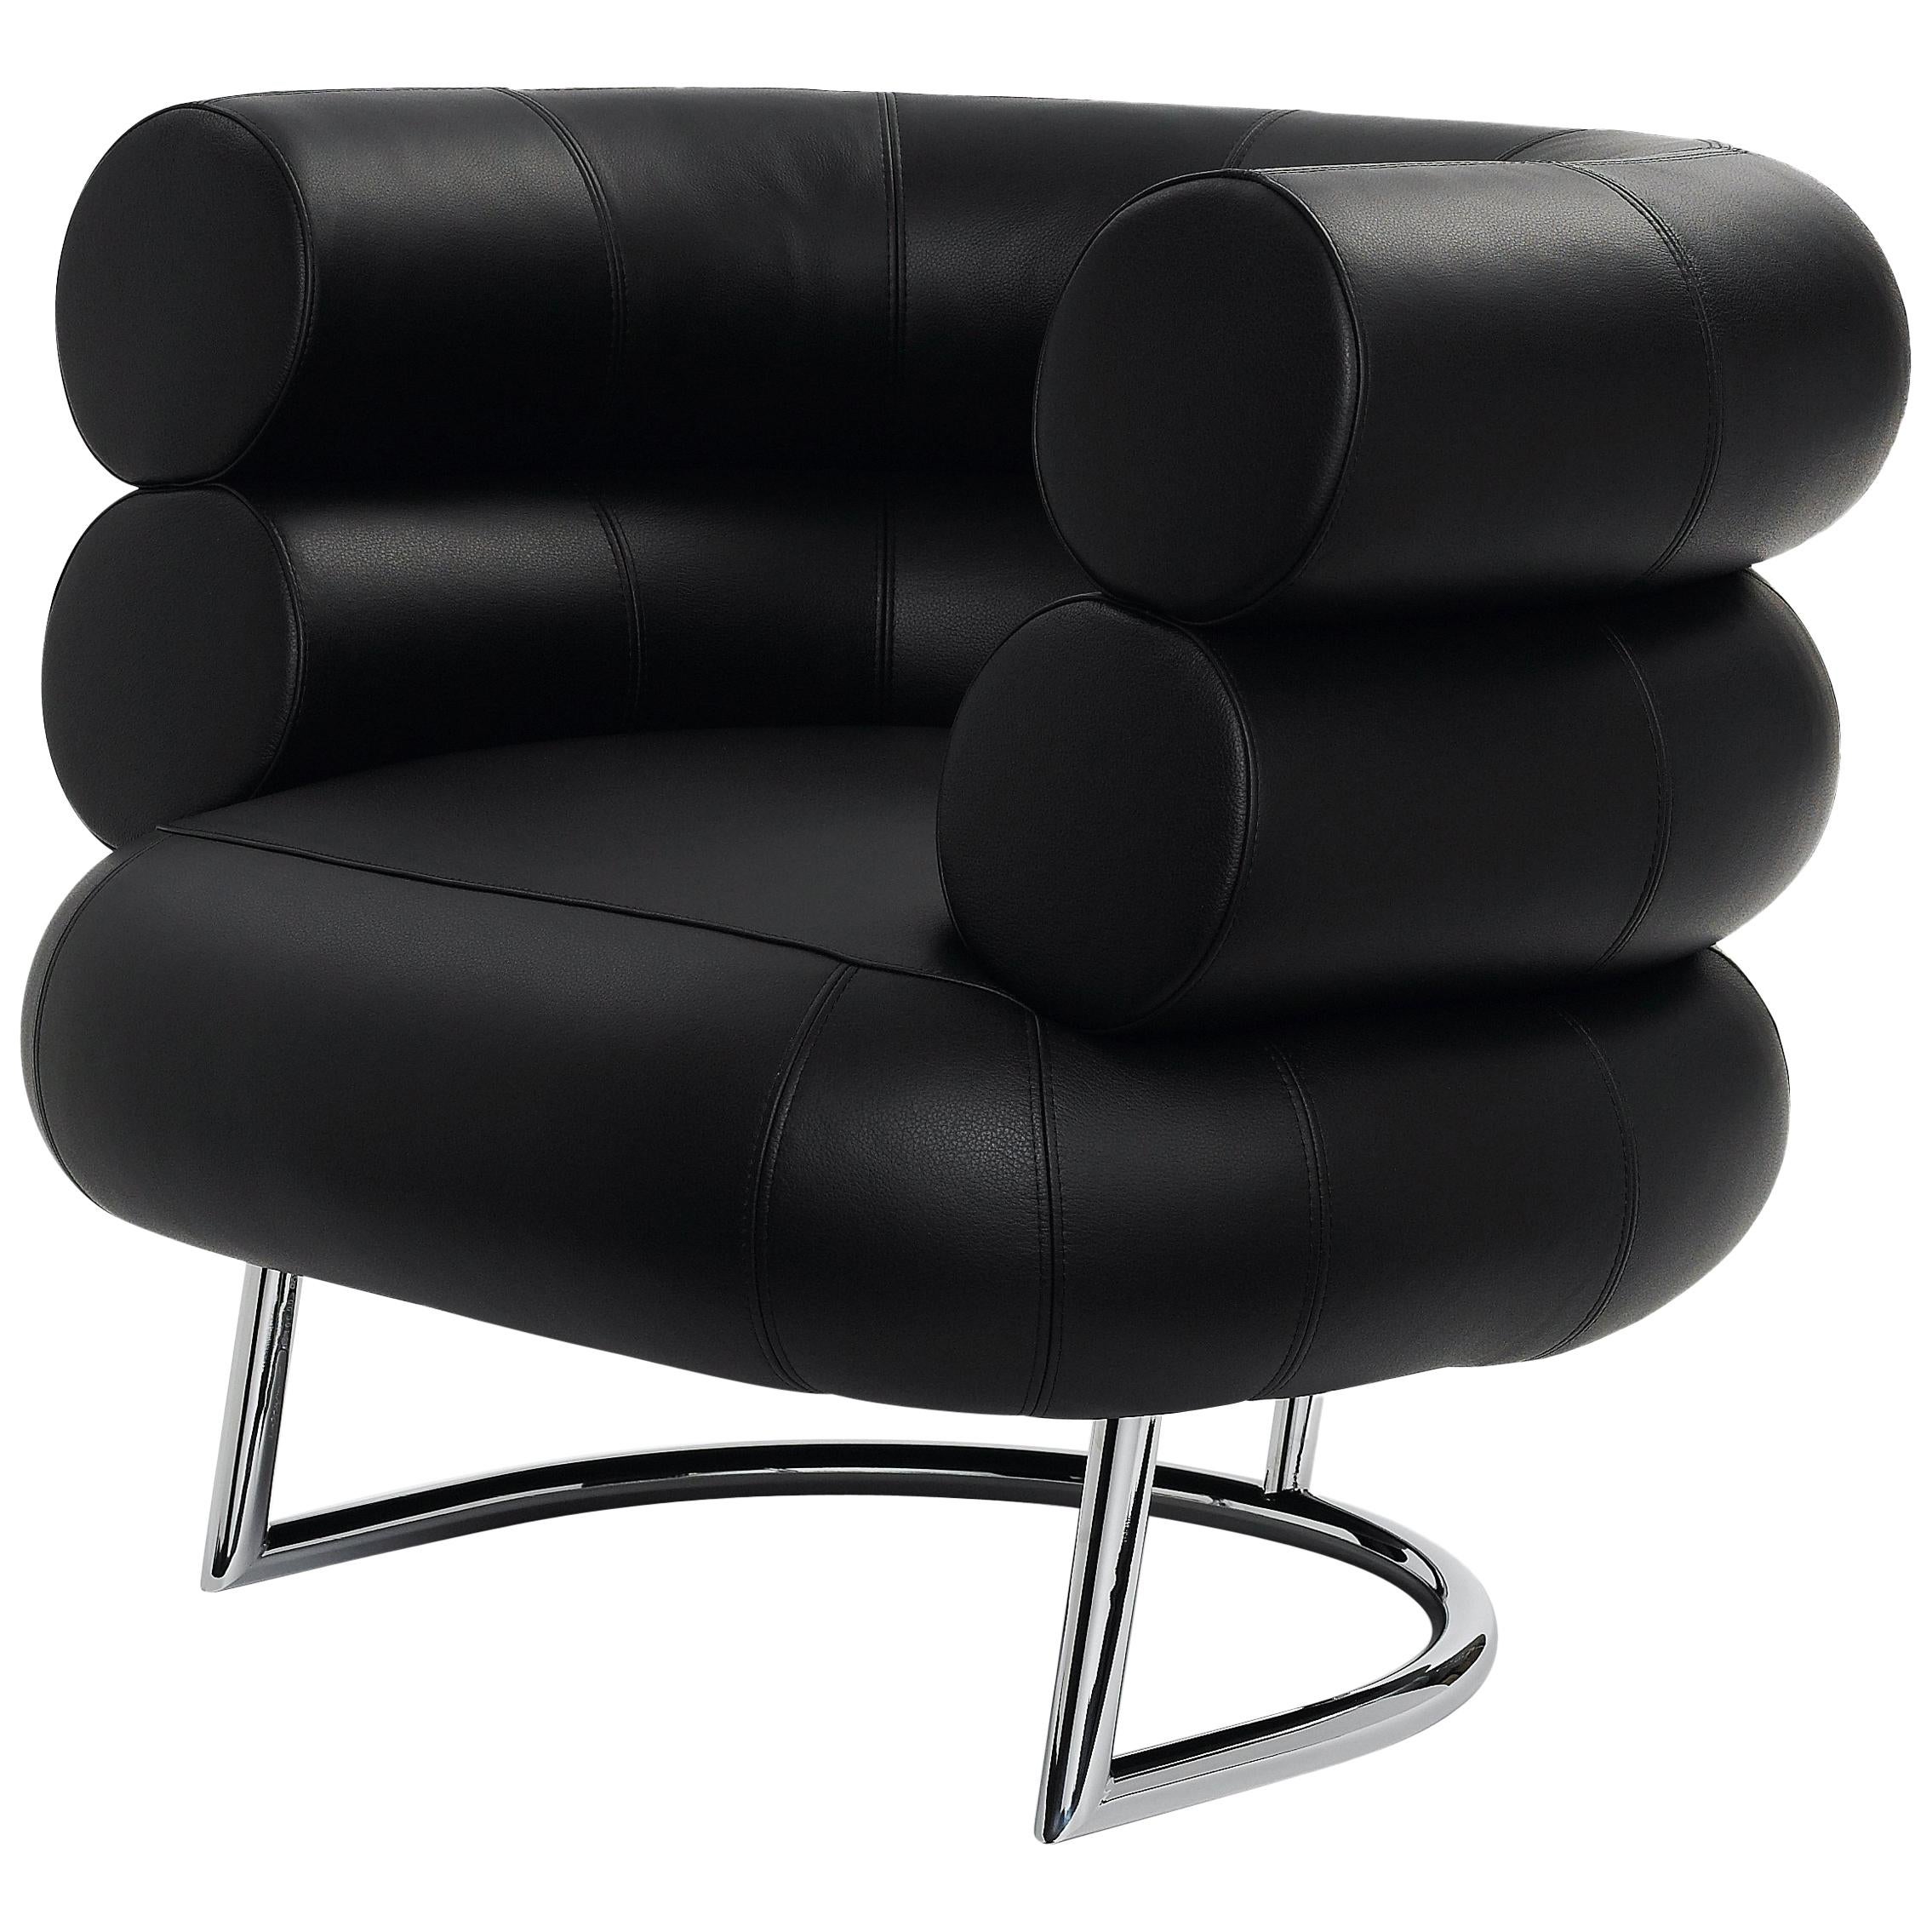 ClassiCon Bibendum Armchair in Black Leather with Chrome Frame by Eileen Gray